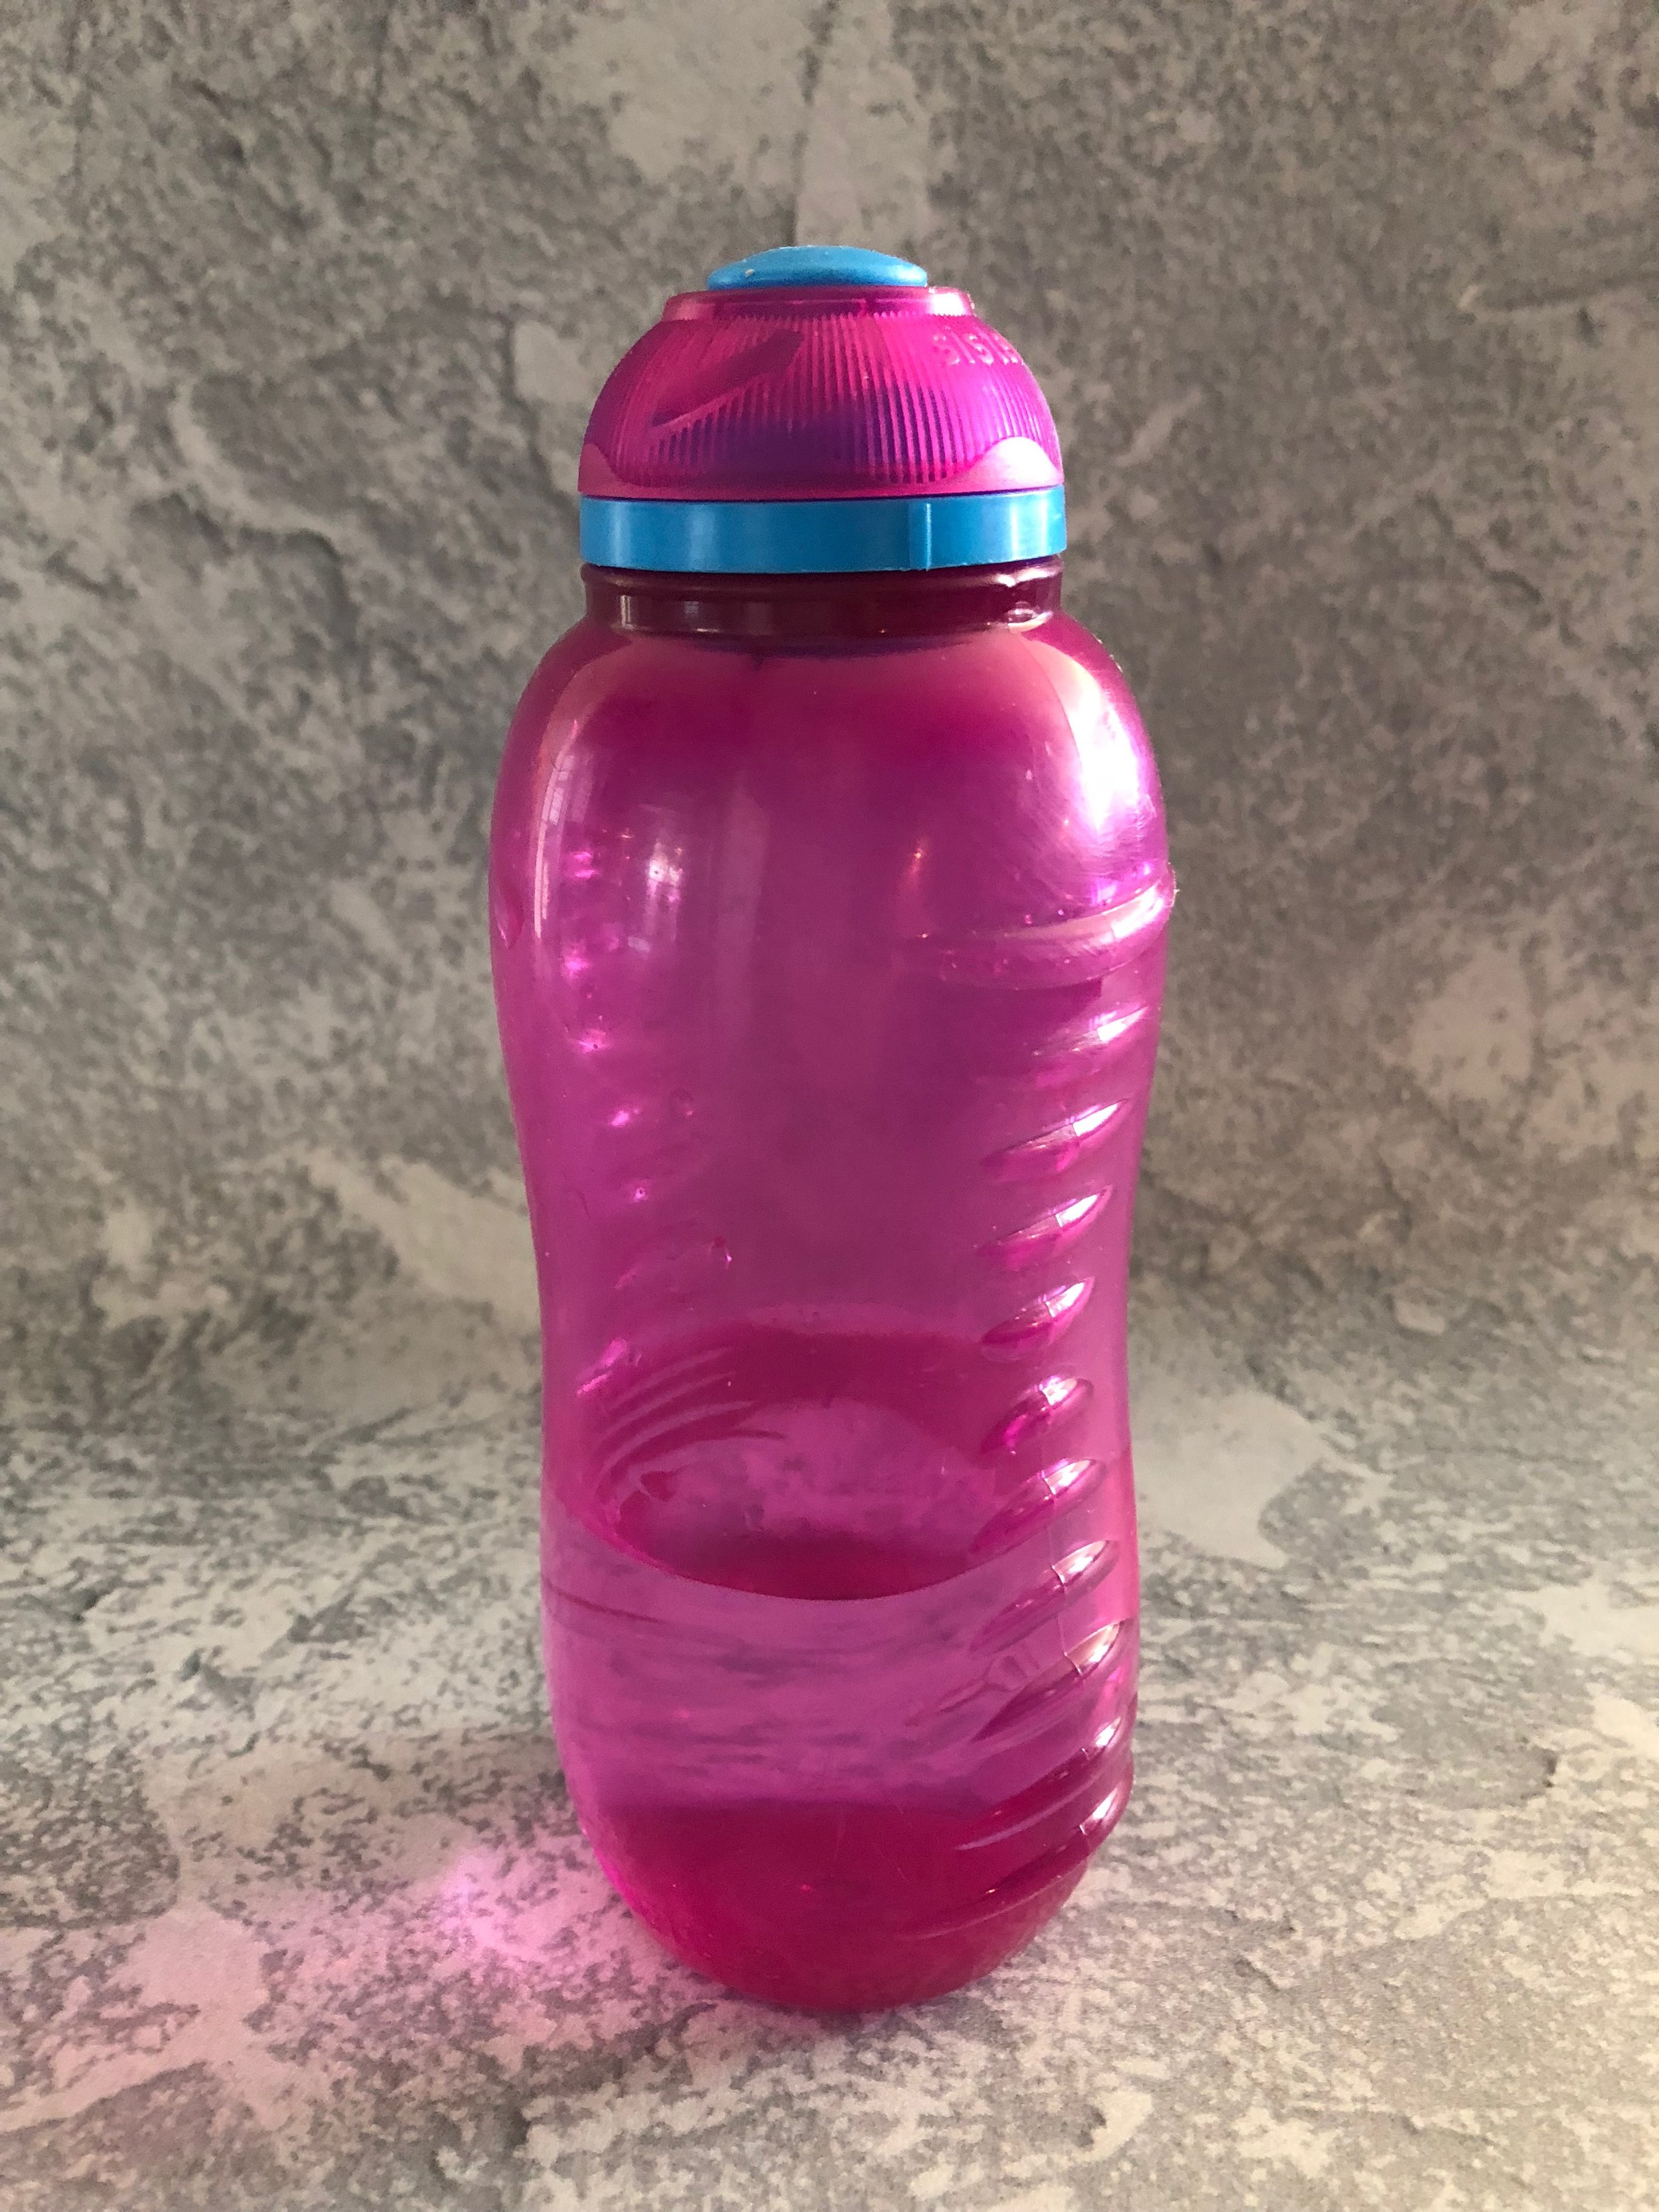 Lunch Box Water Bottle Sistema 1 Keto and Low Carb.jpg